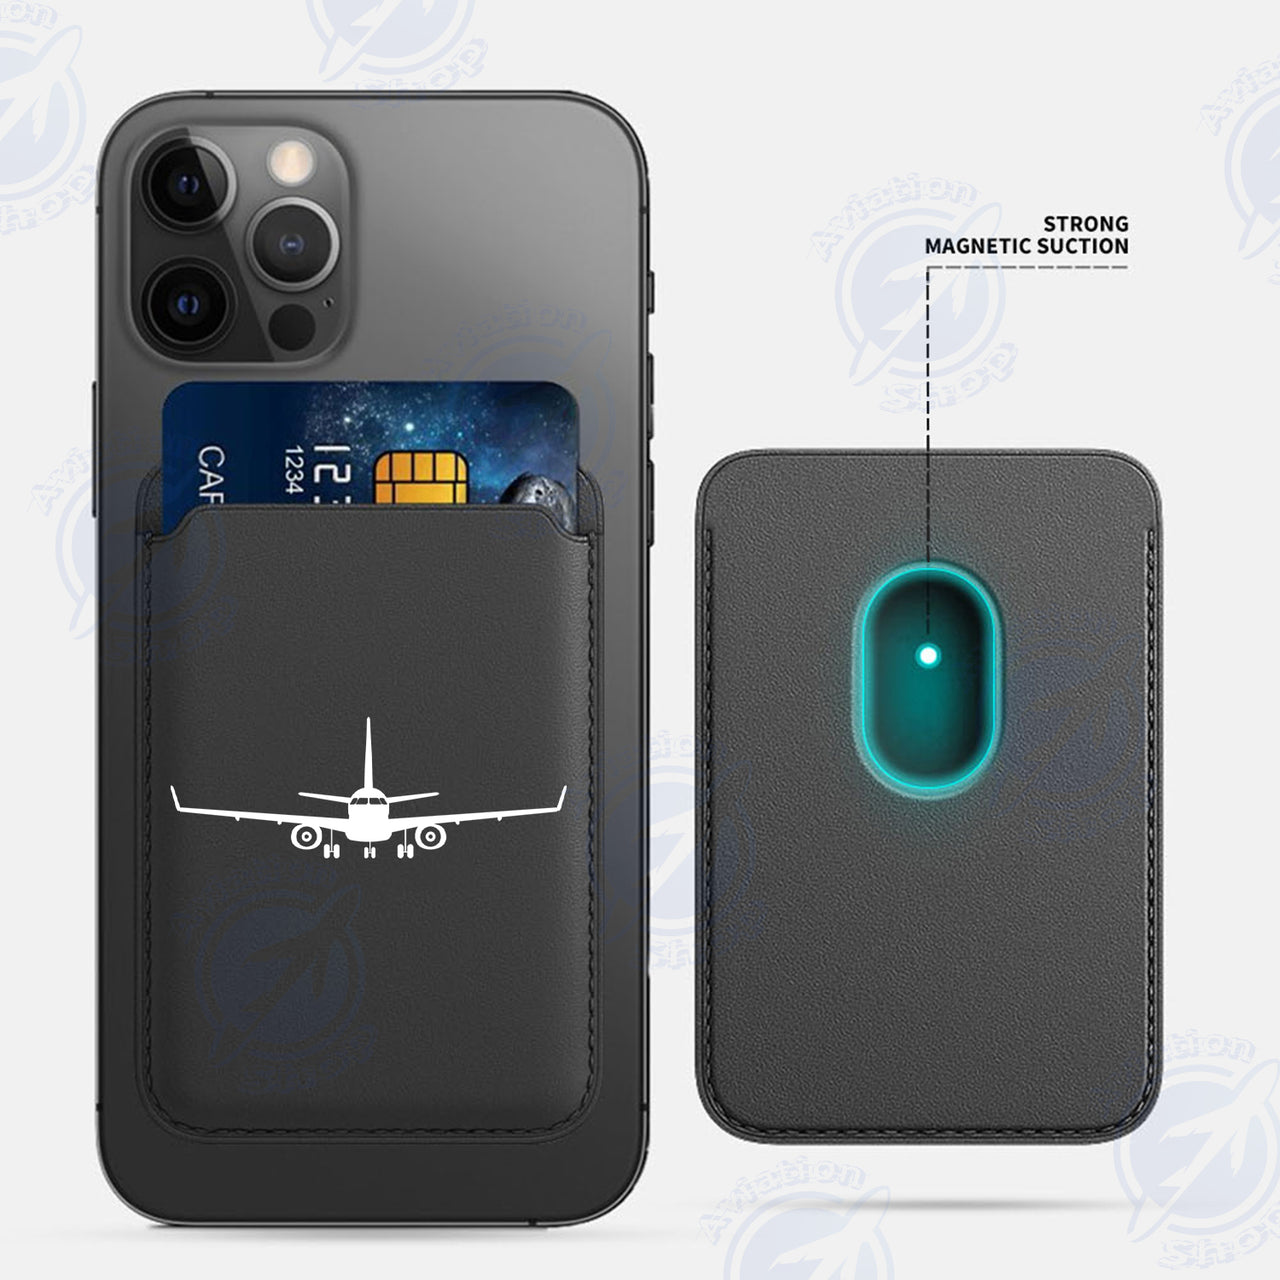 Embraer E-190 Silhouette Plane iPhone Cases Magnetic Card Wallet